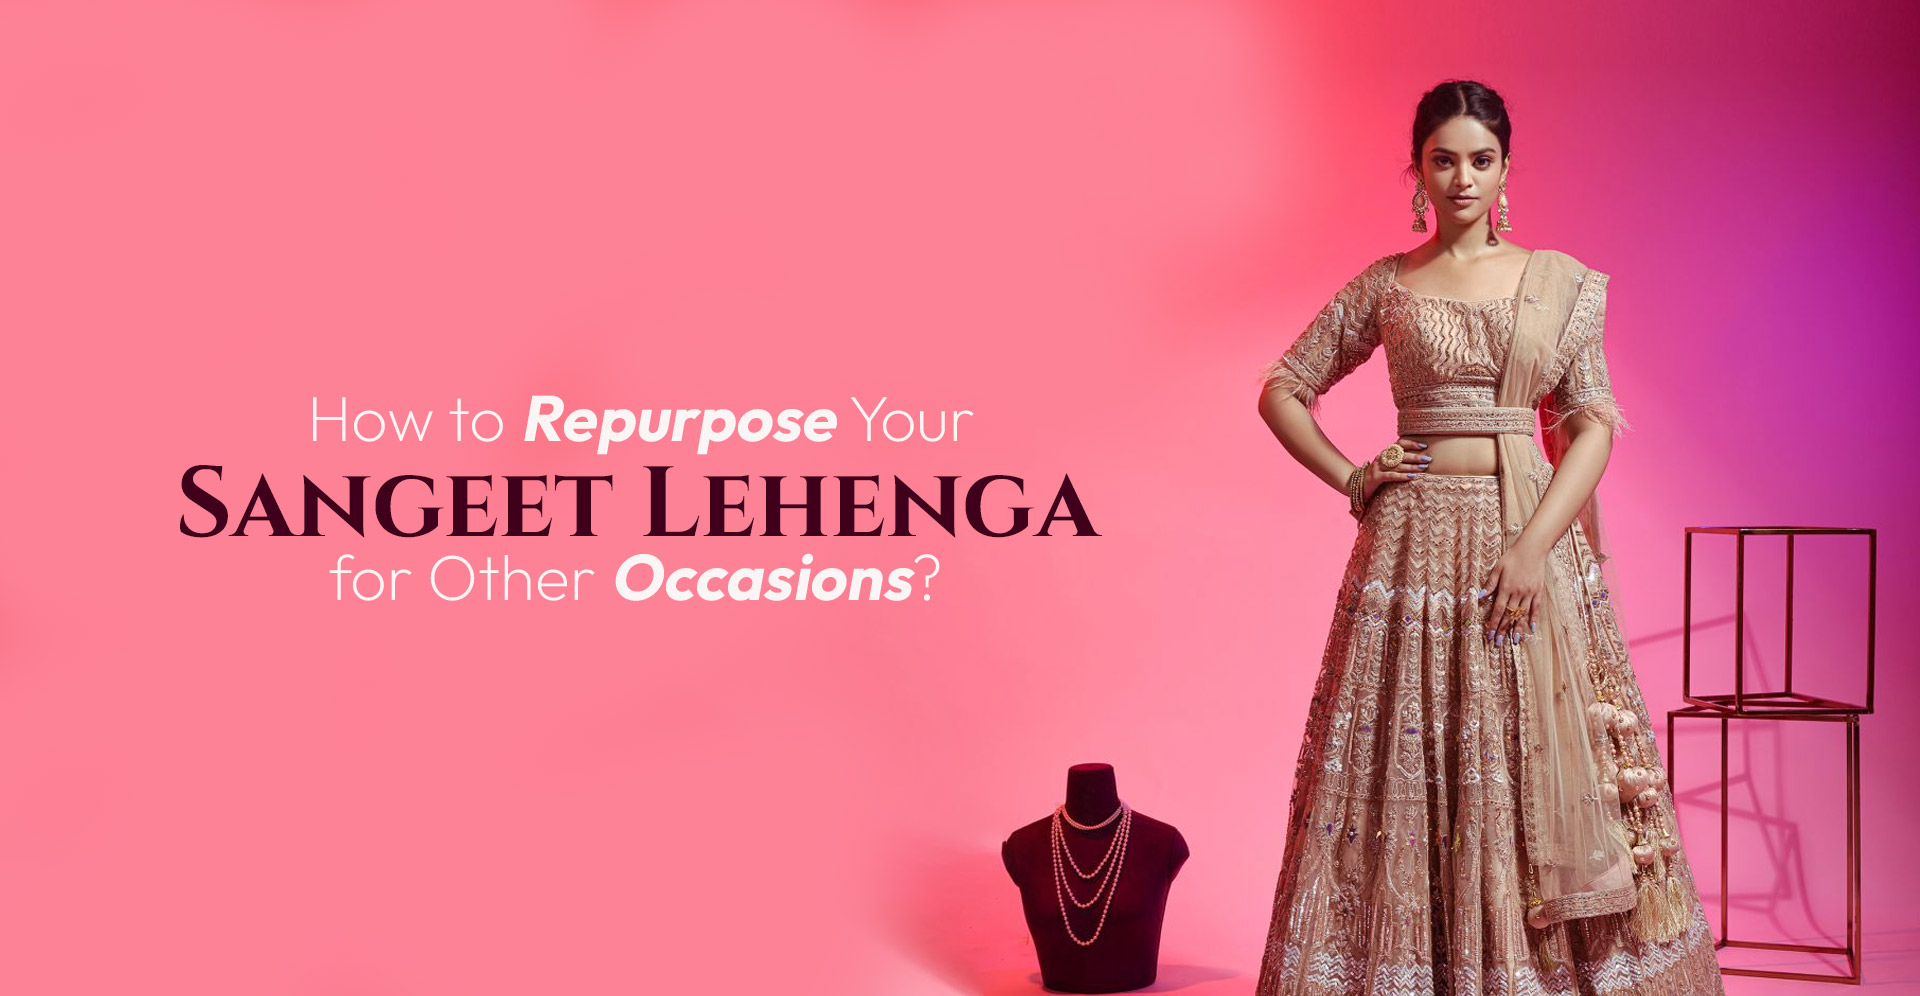 How to Repurpose Your Sangeet Lehenga for Other Occasions?